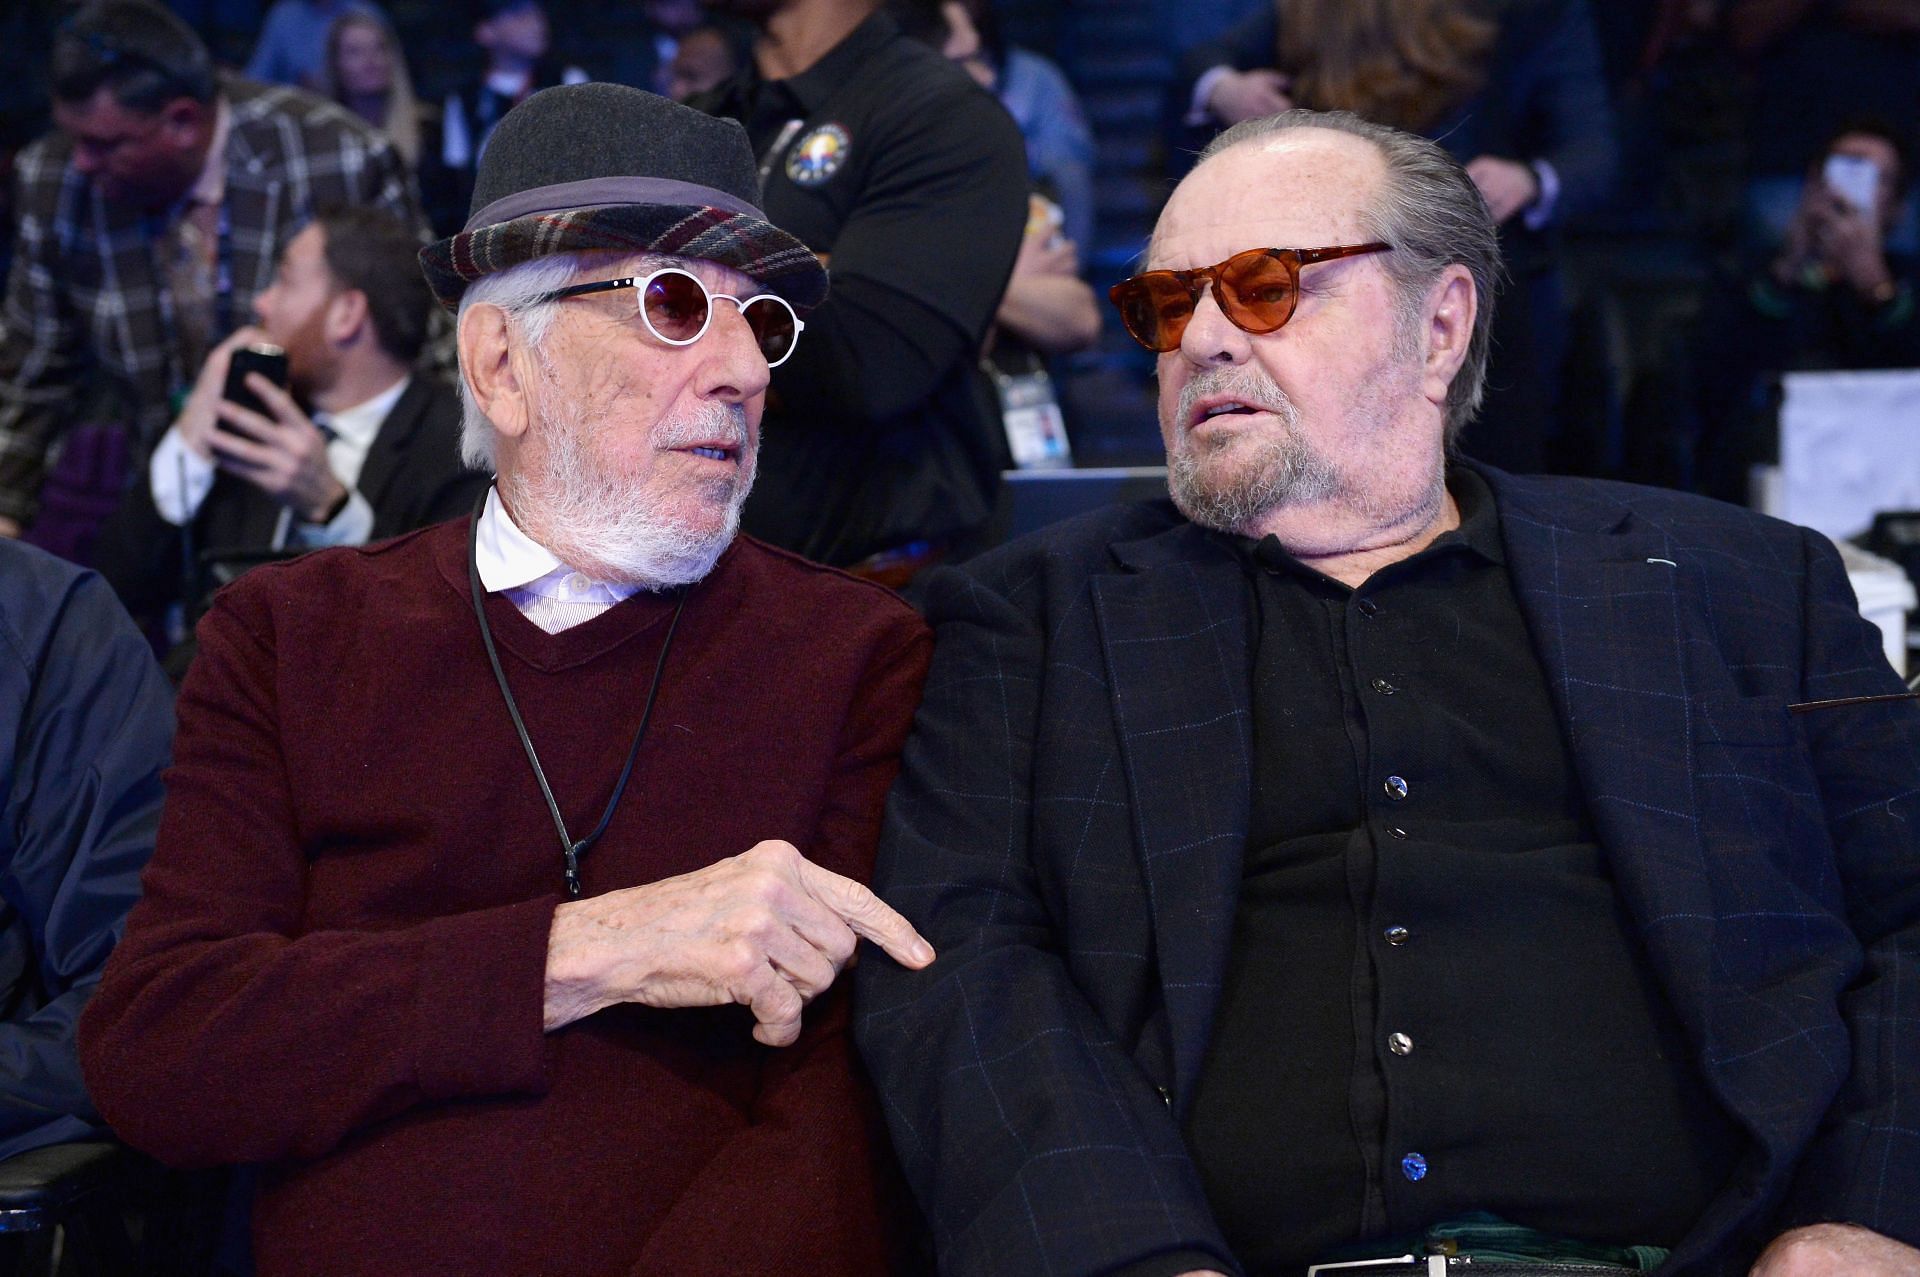 LOS ANGELES, CA - FEBRUARY 18: Lou Adler (L) and Jack Nicholson attend the NBA All-Star Game 2018 at Staples Center on February 18, 2018 in Los Angeles, California. (Photo by Kevork Djansezian/Getty Images)